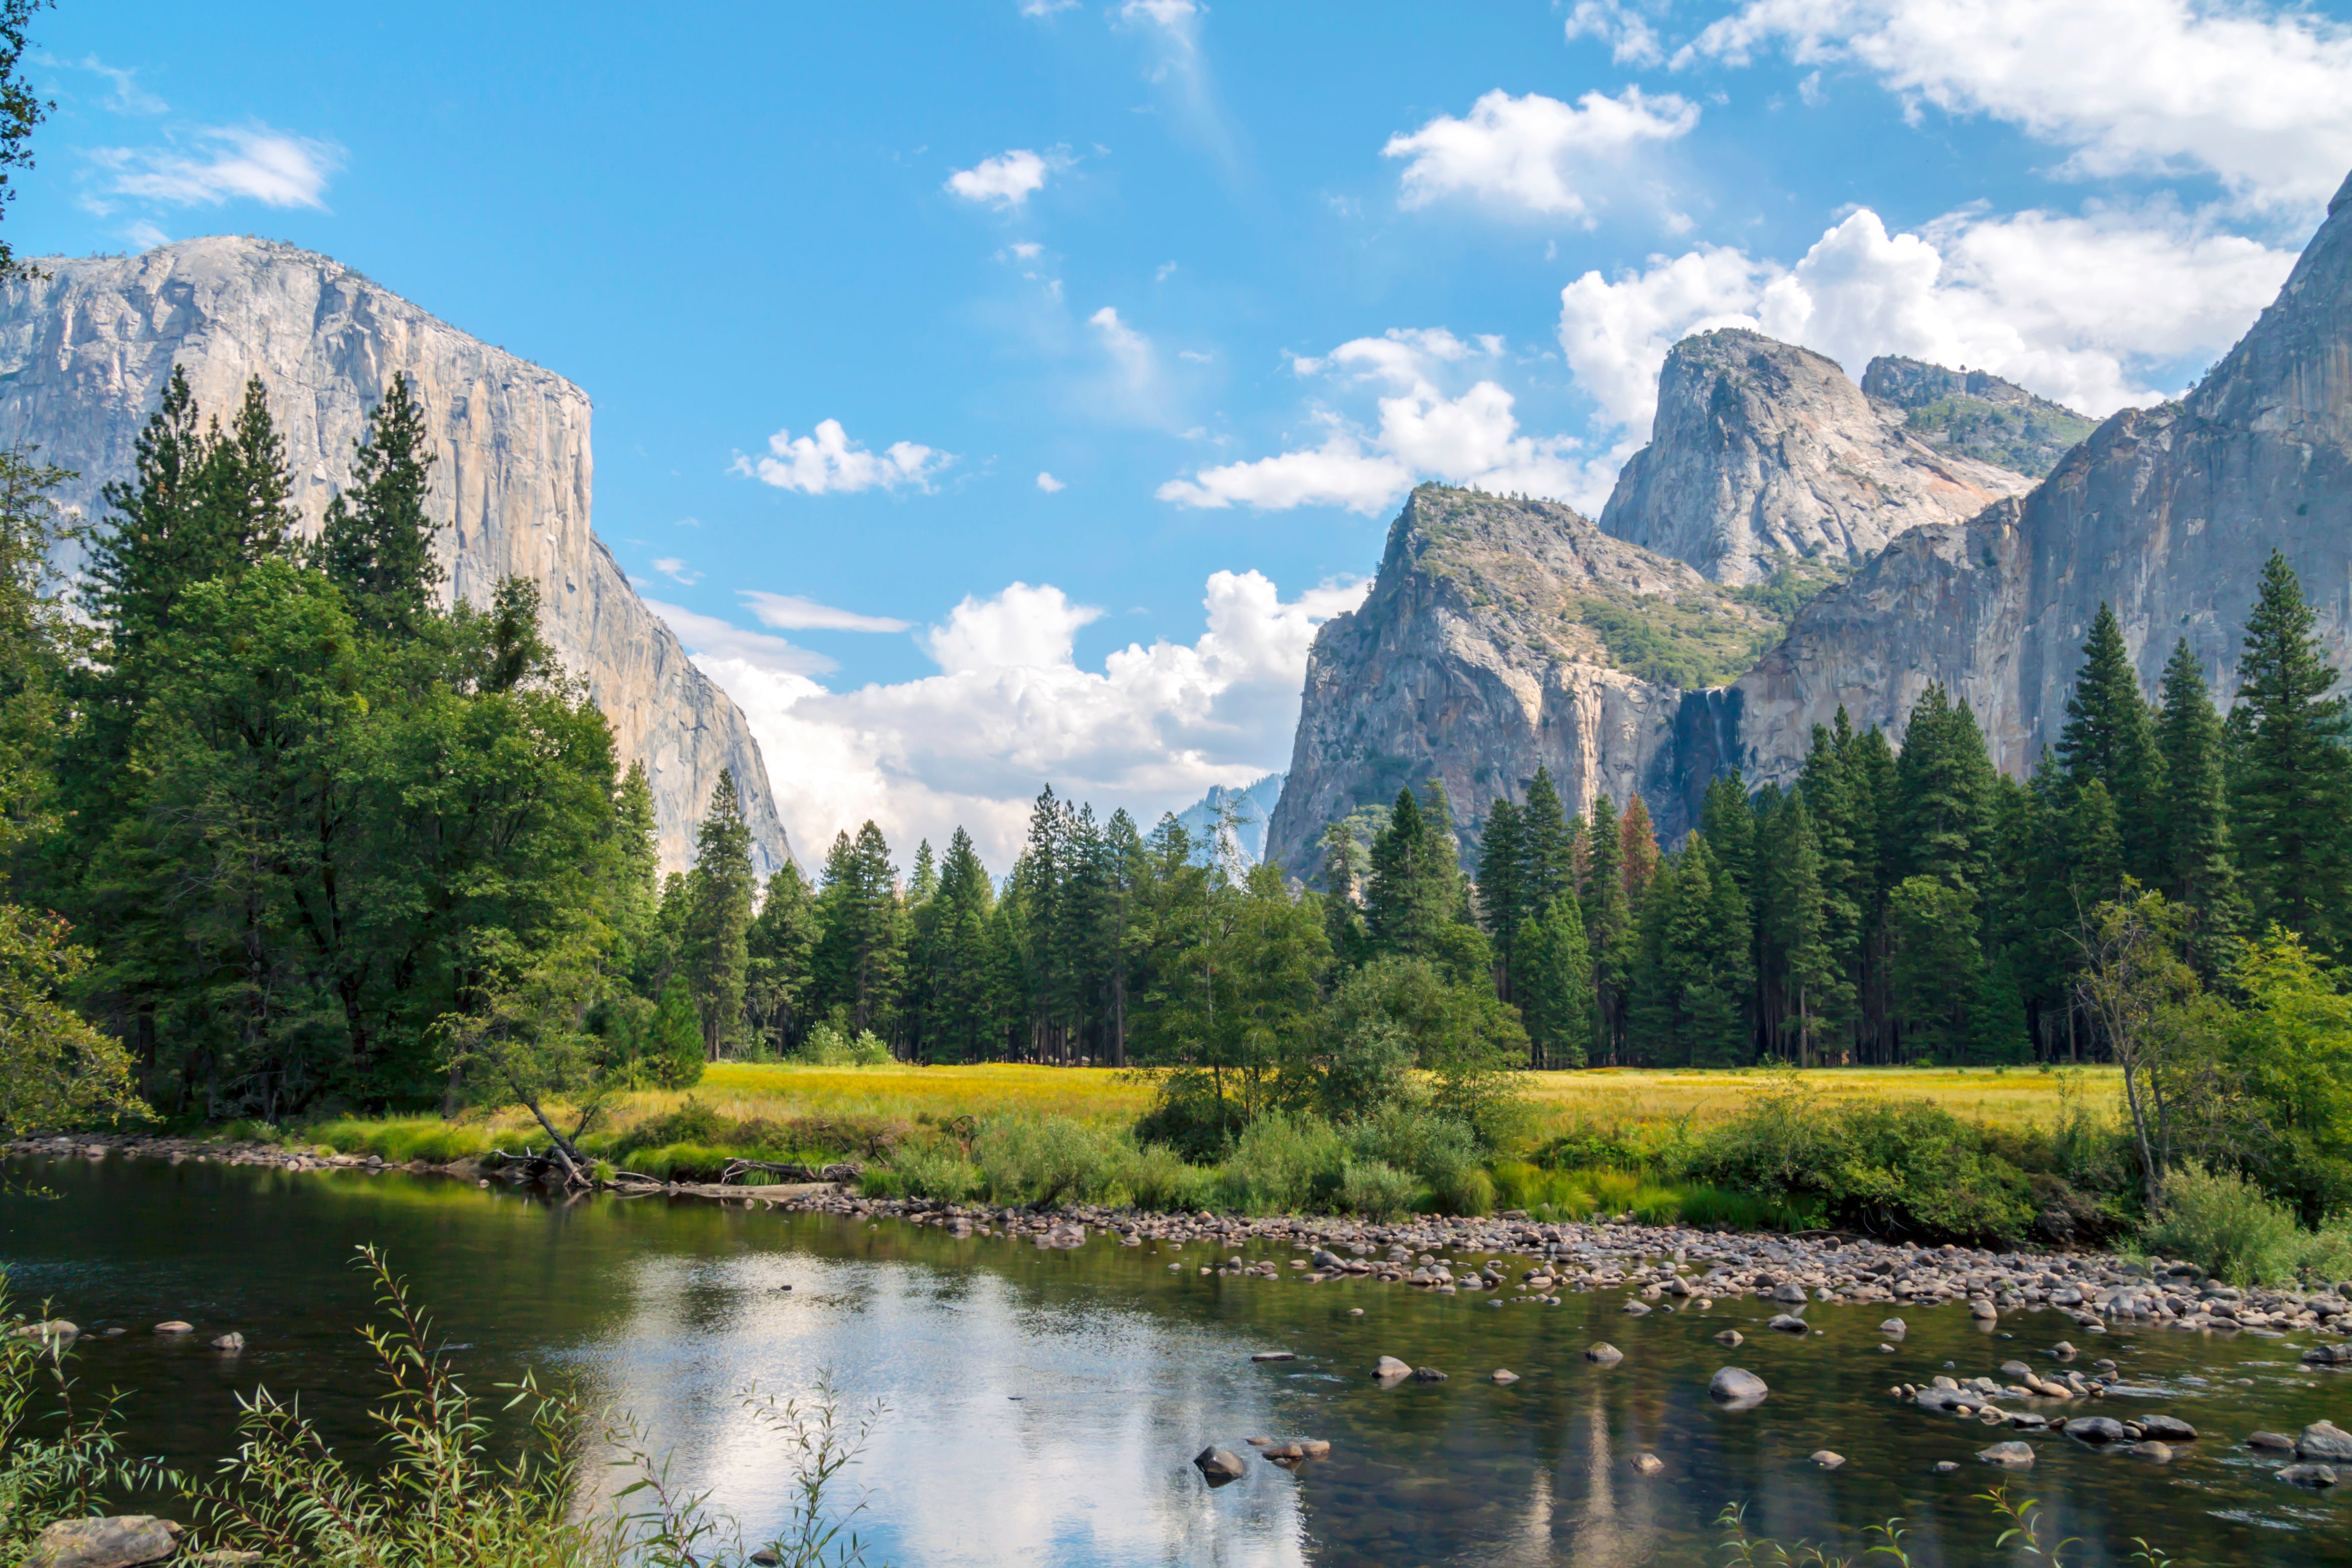 There’s colossal rocks to climb and giant sequoia groves in Yosemite